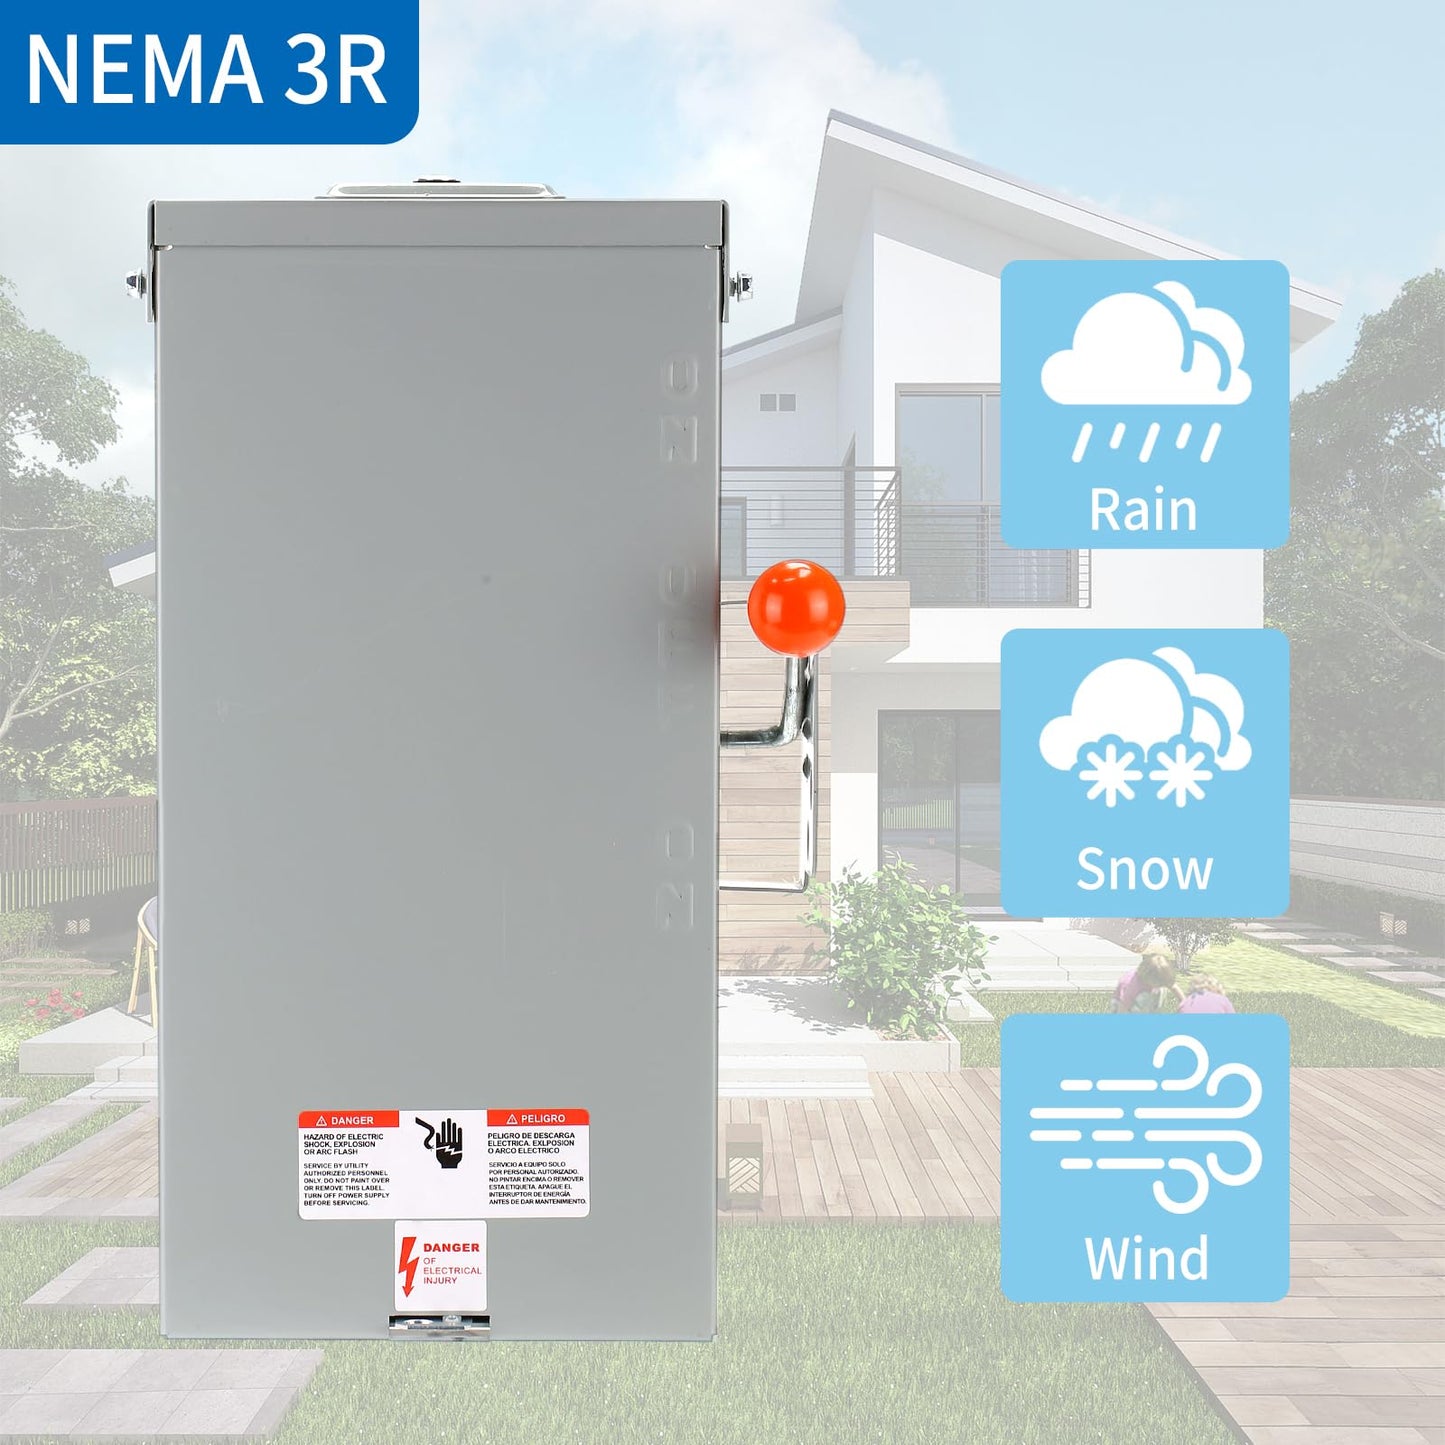 100A Generator Transfer Switch,24000W General-Duty Double-Throw Safety Switch,120/240-Volt Transfer Switch,Stronger Stability Manual Transfer Switch,Meeting NEMA 3R Standards for Outdoor and Indoor